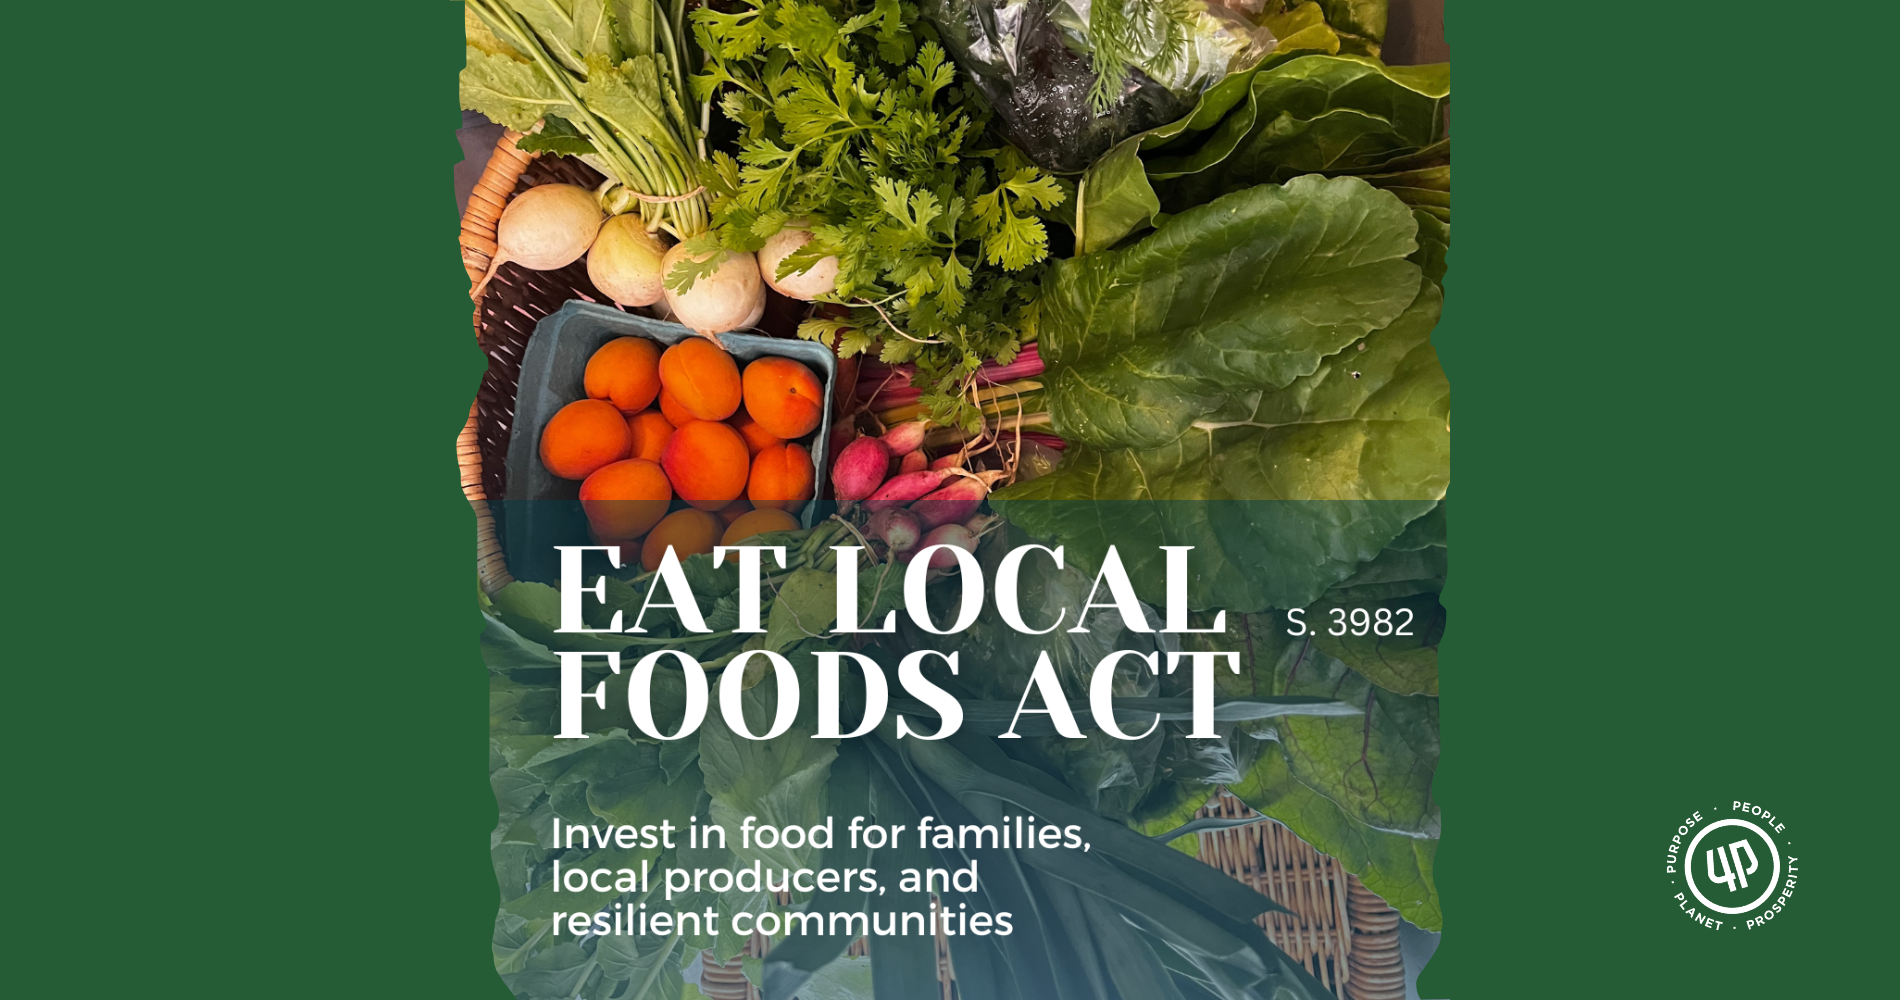 The EAT Local Food Act image